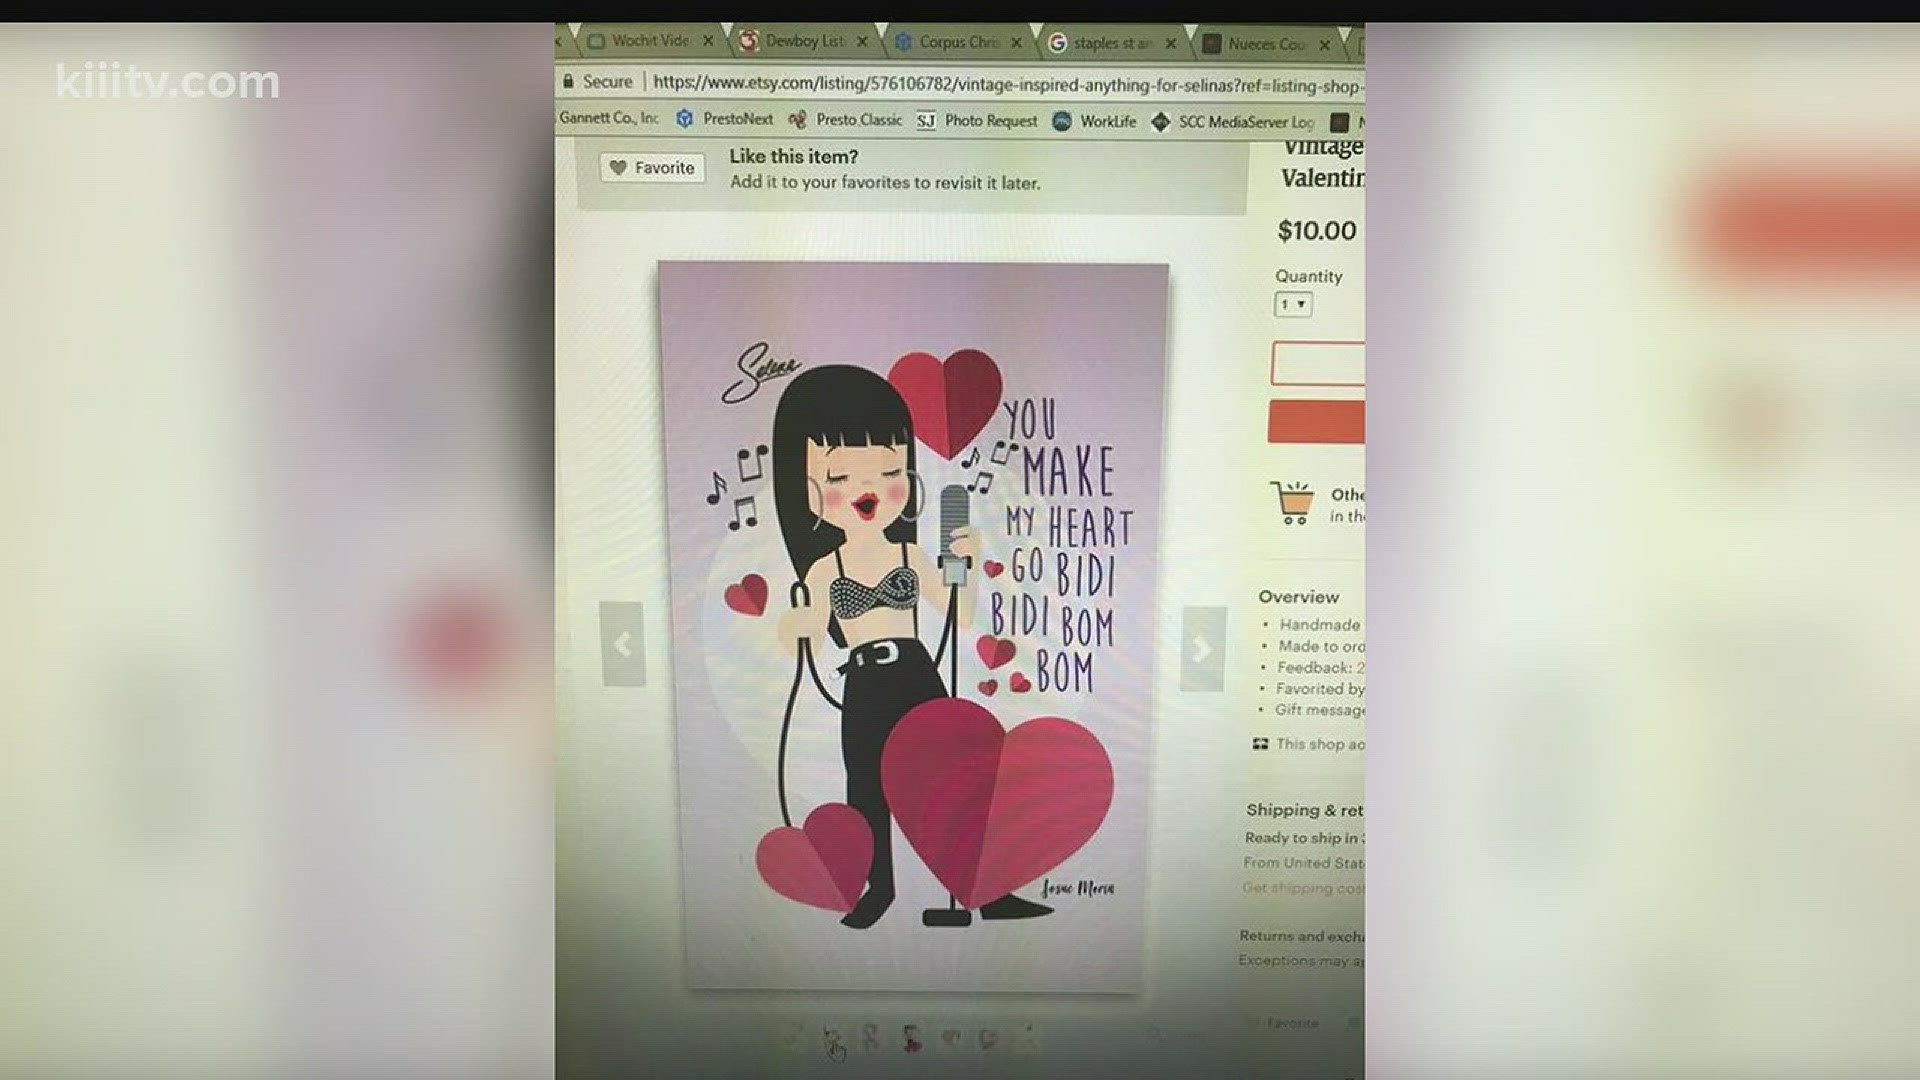 An online shop on the popular retail site "Etsy" has created and is selling Selena-inspired Valentine's Day cards.